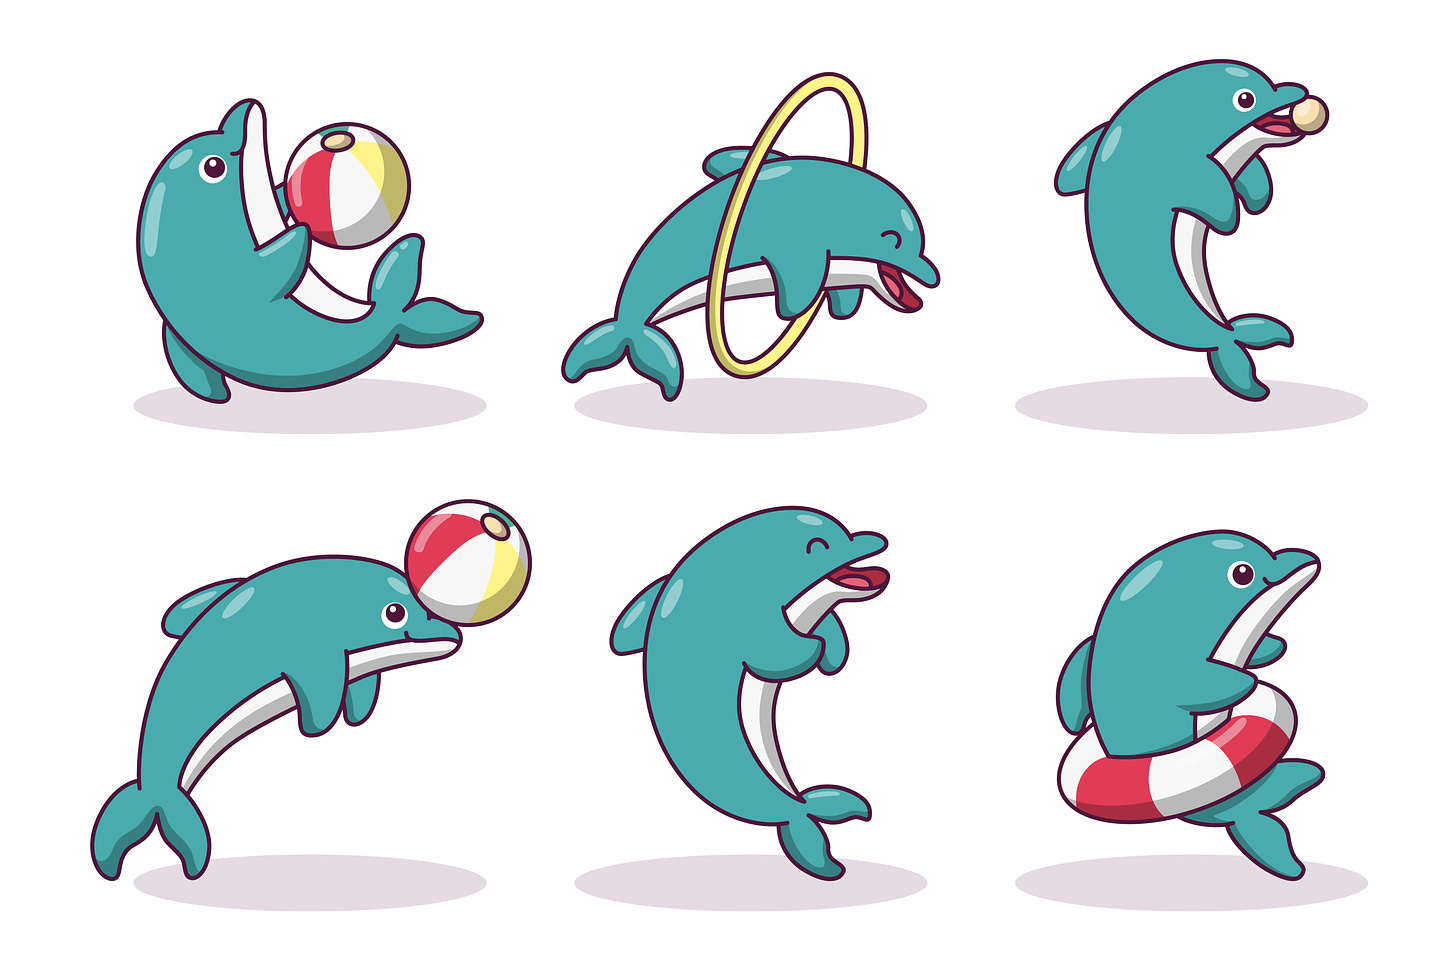 6 cartoon dolphins at play, much like endorphins relieving stress.